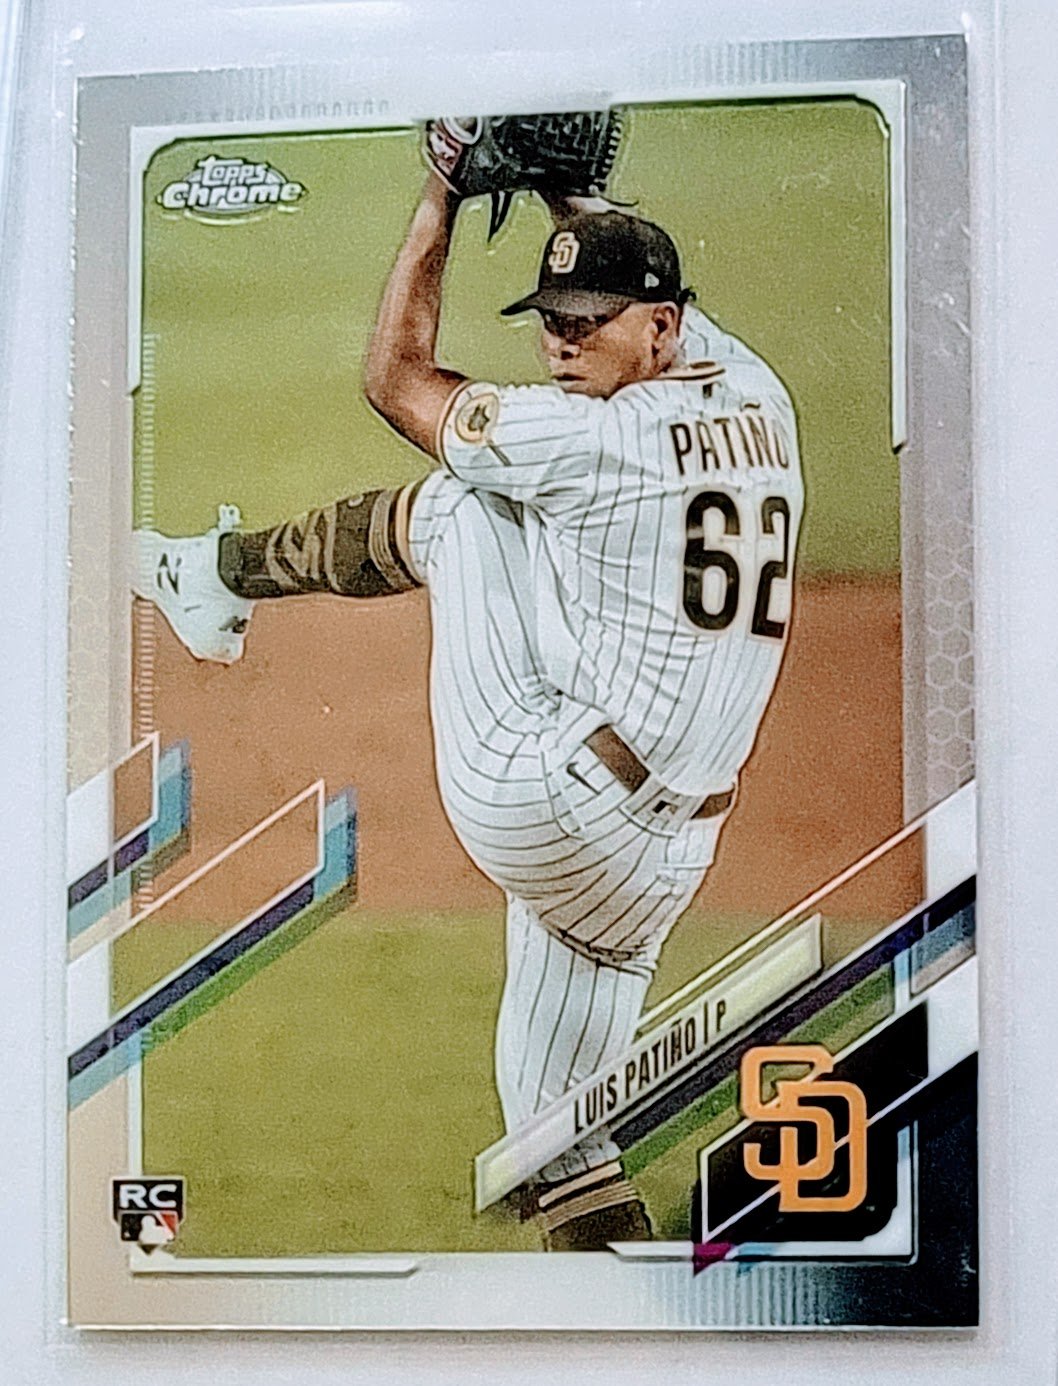 2021 Topps Chrome Luis Patino Rookie Baseball Card TPTV simple Xclusive Collectibles   